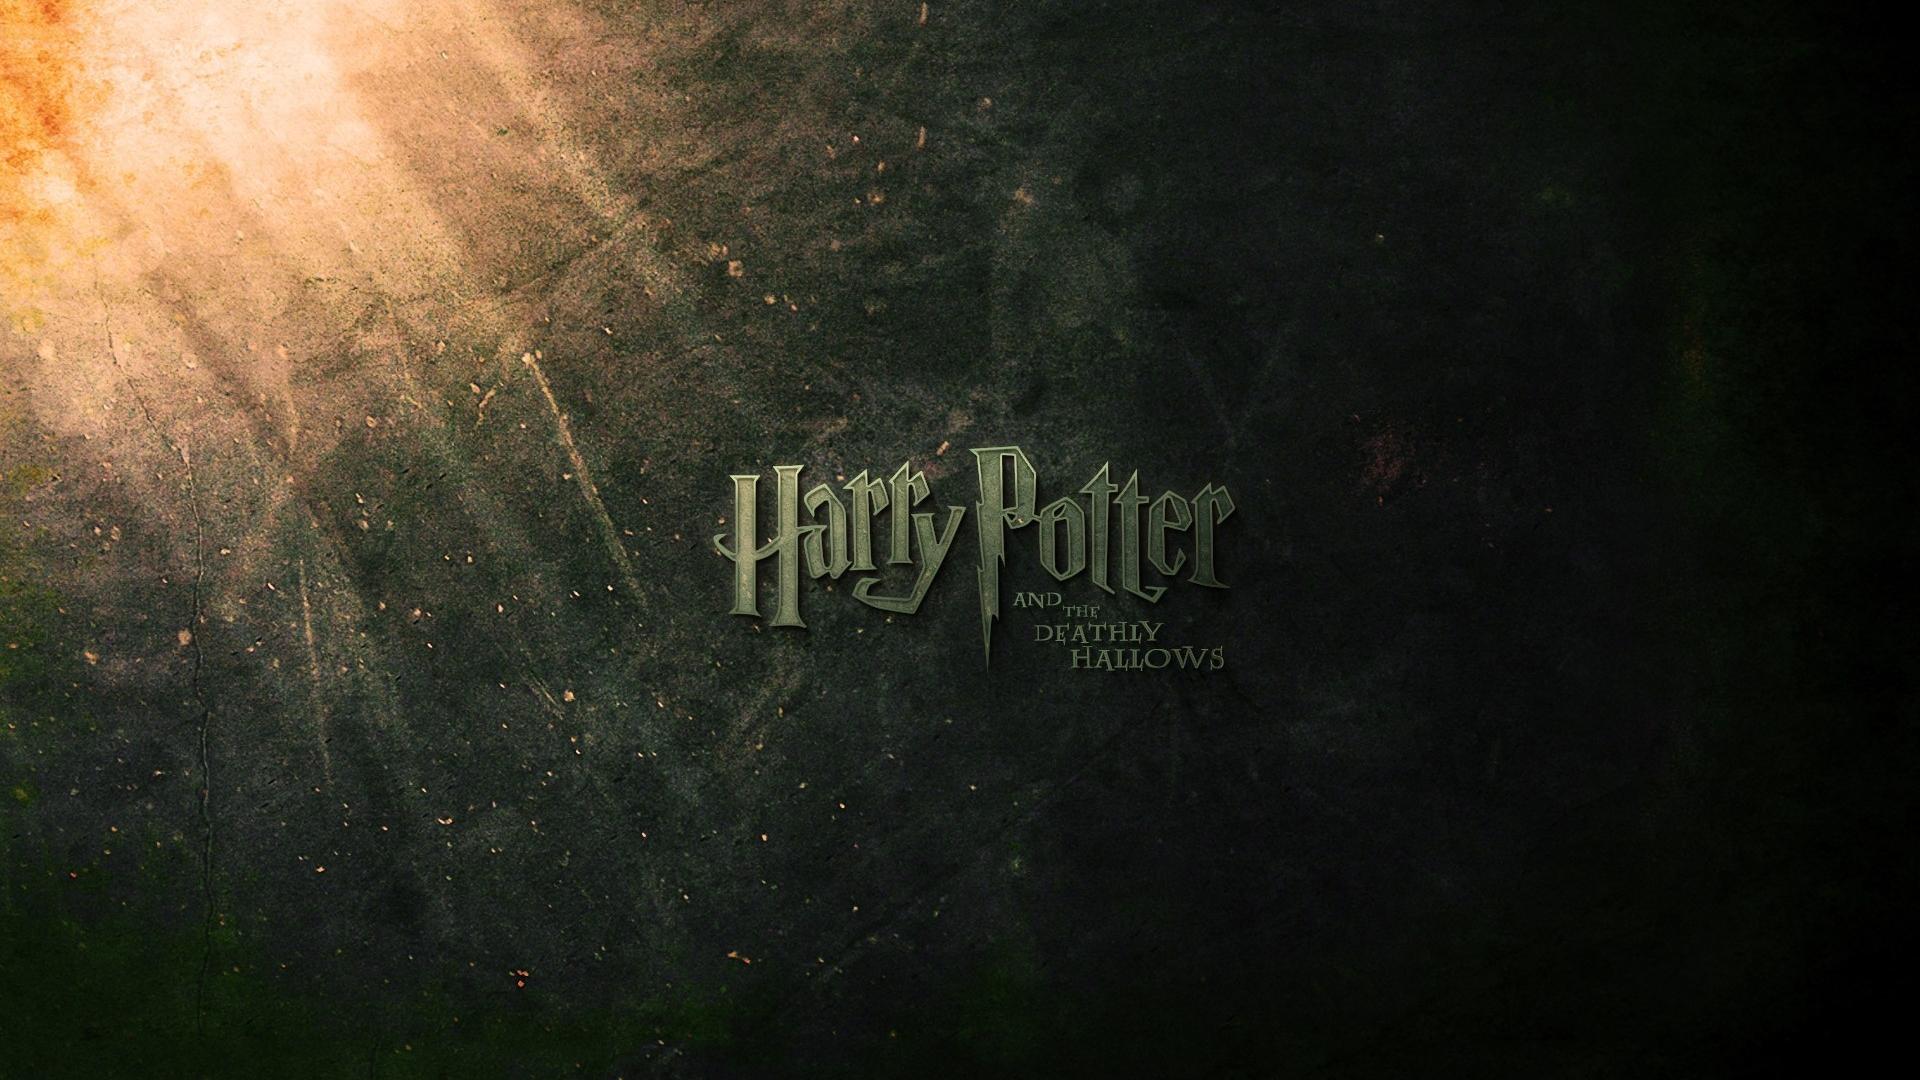 Light grunge harry potter and the deathly hallows wallpaper 5903